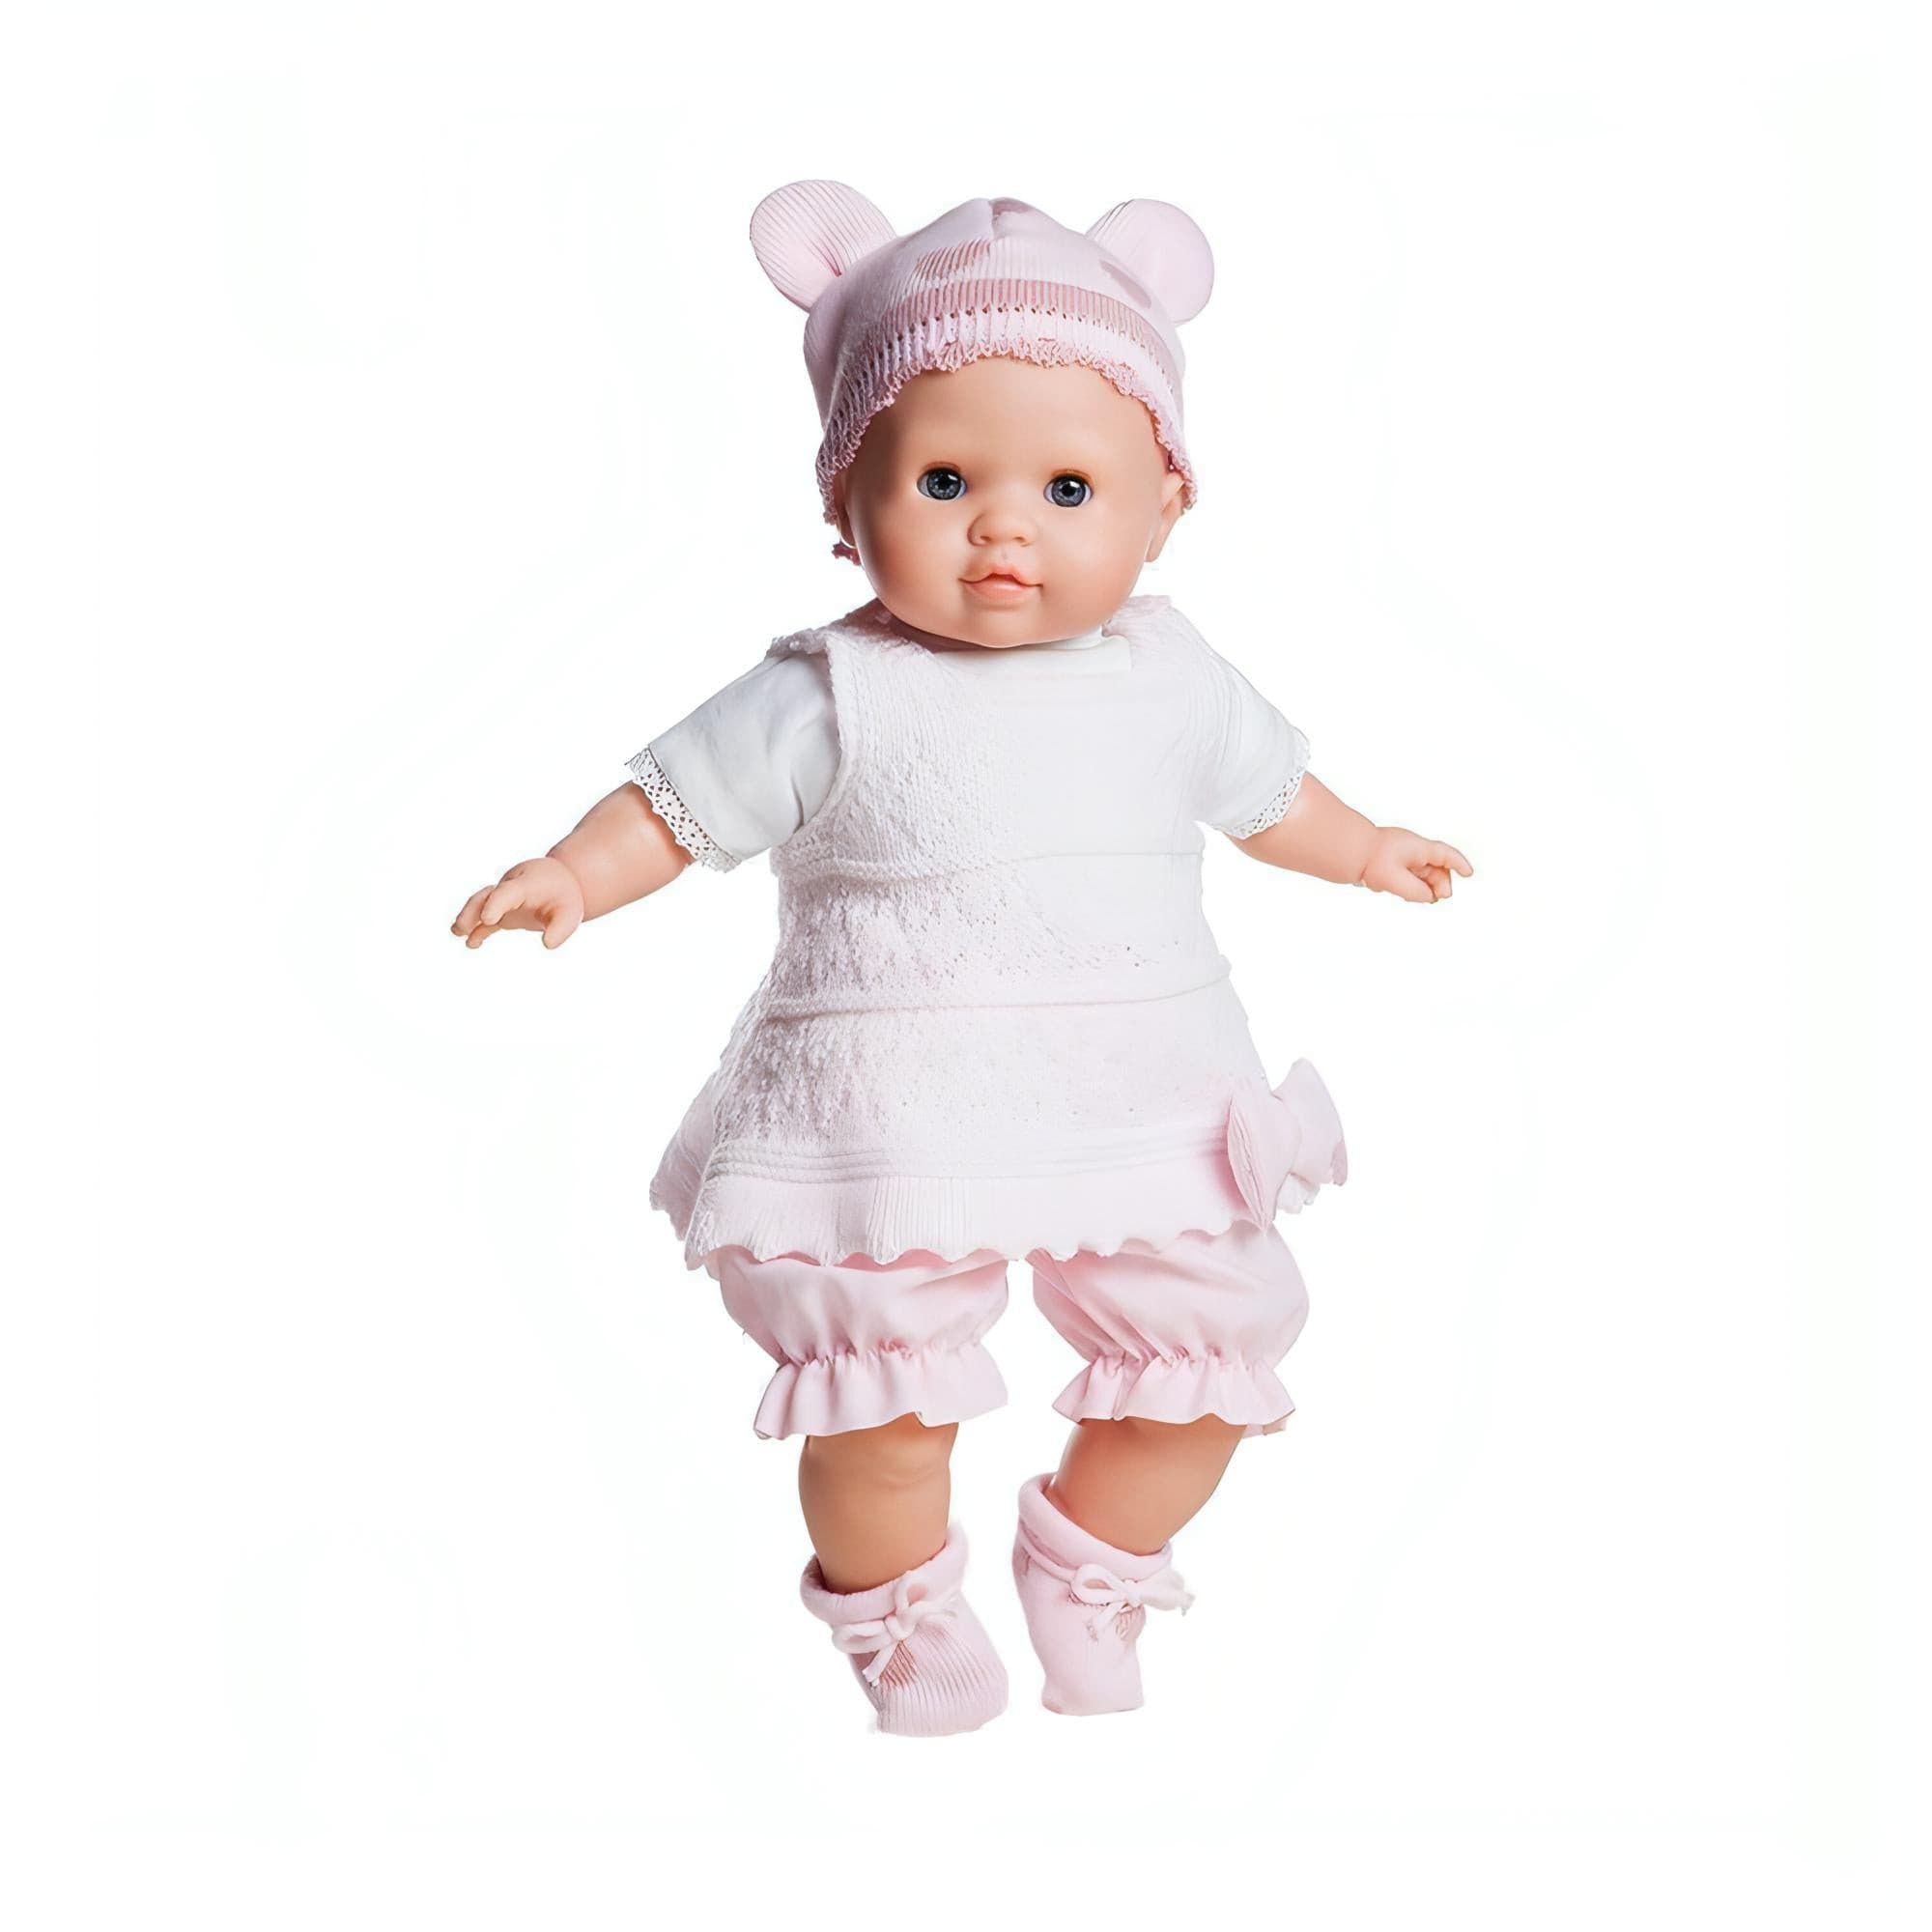 Paola Reina doll – Lola - Lily Sprout Collection